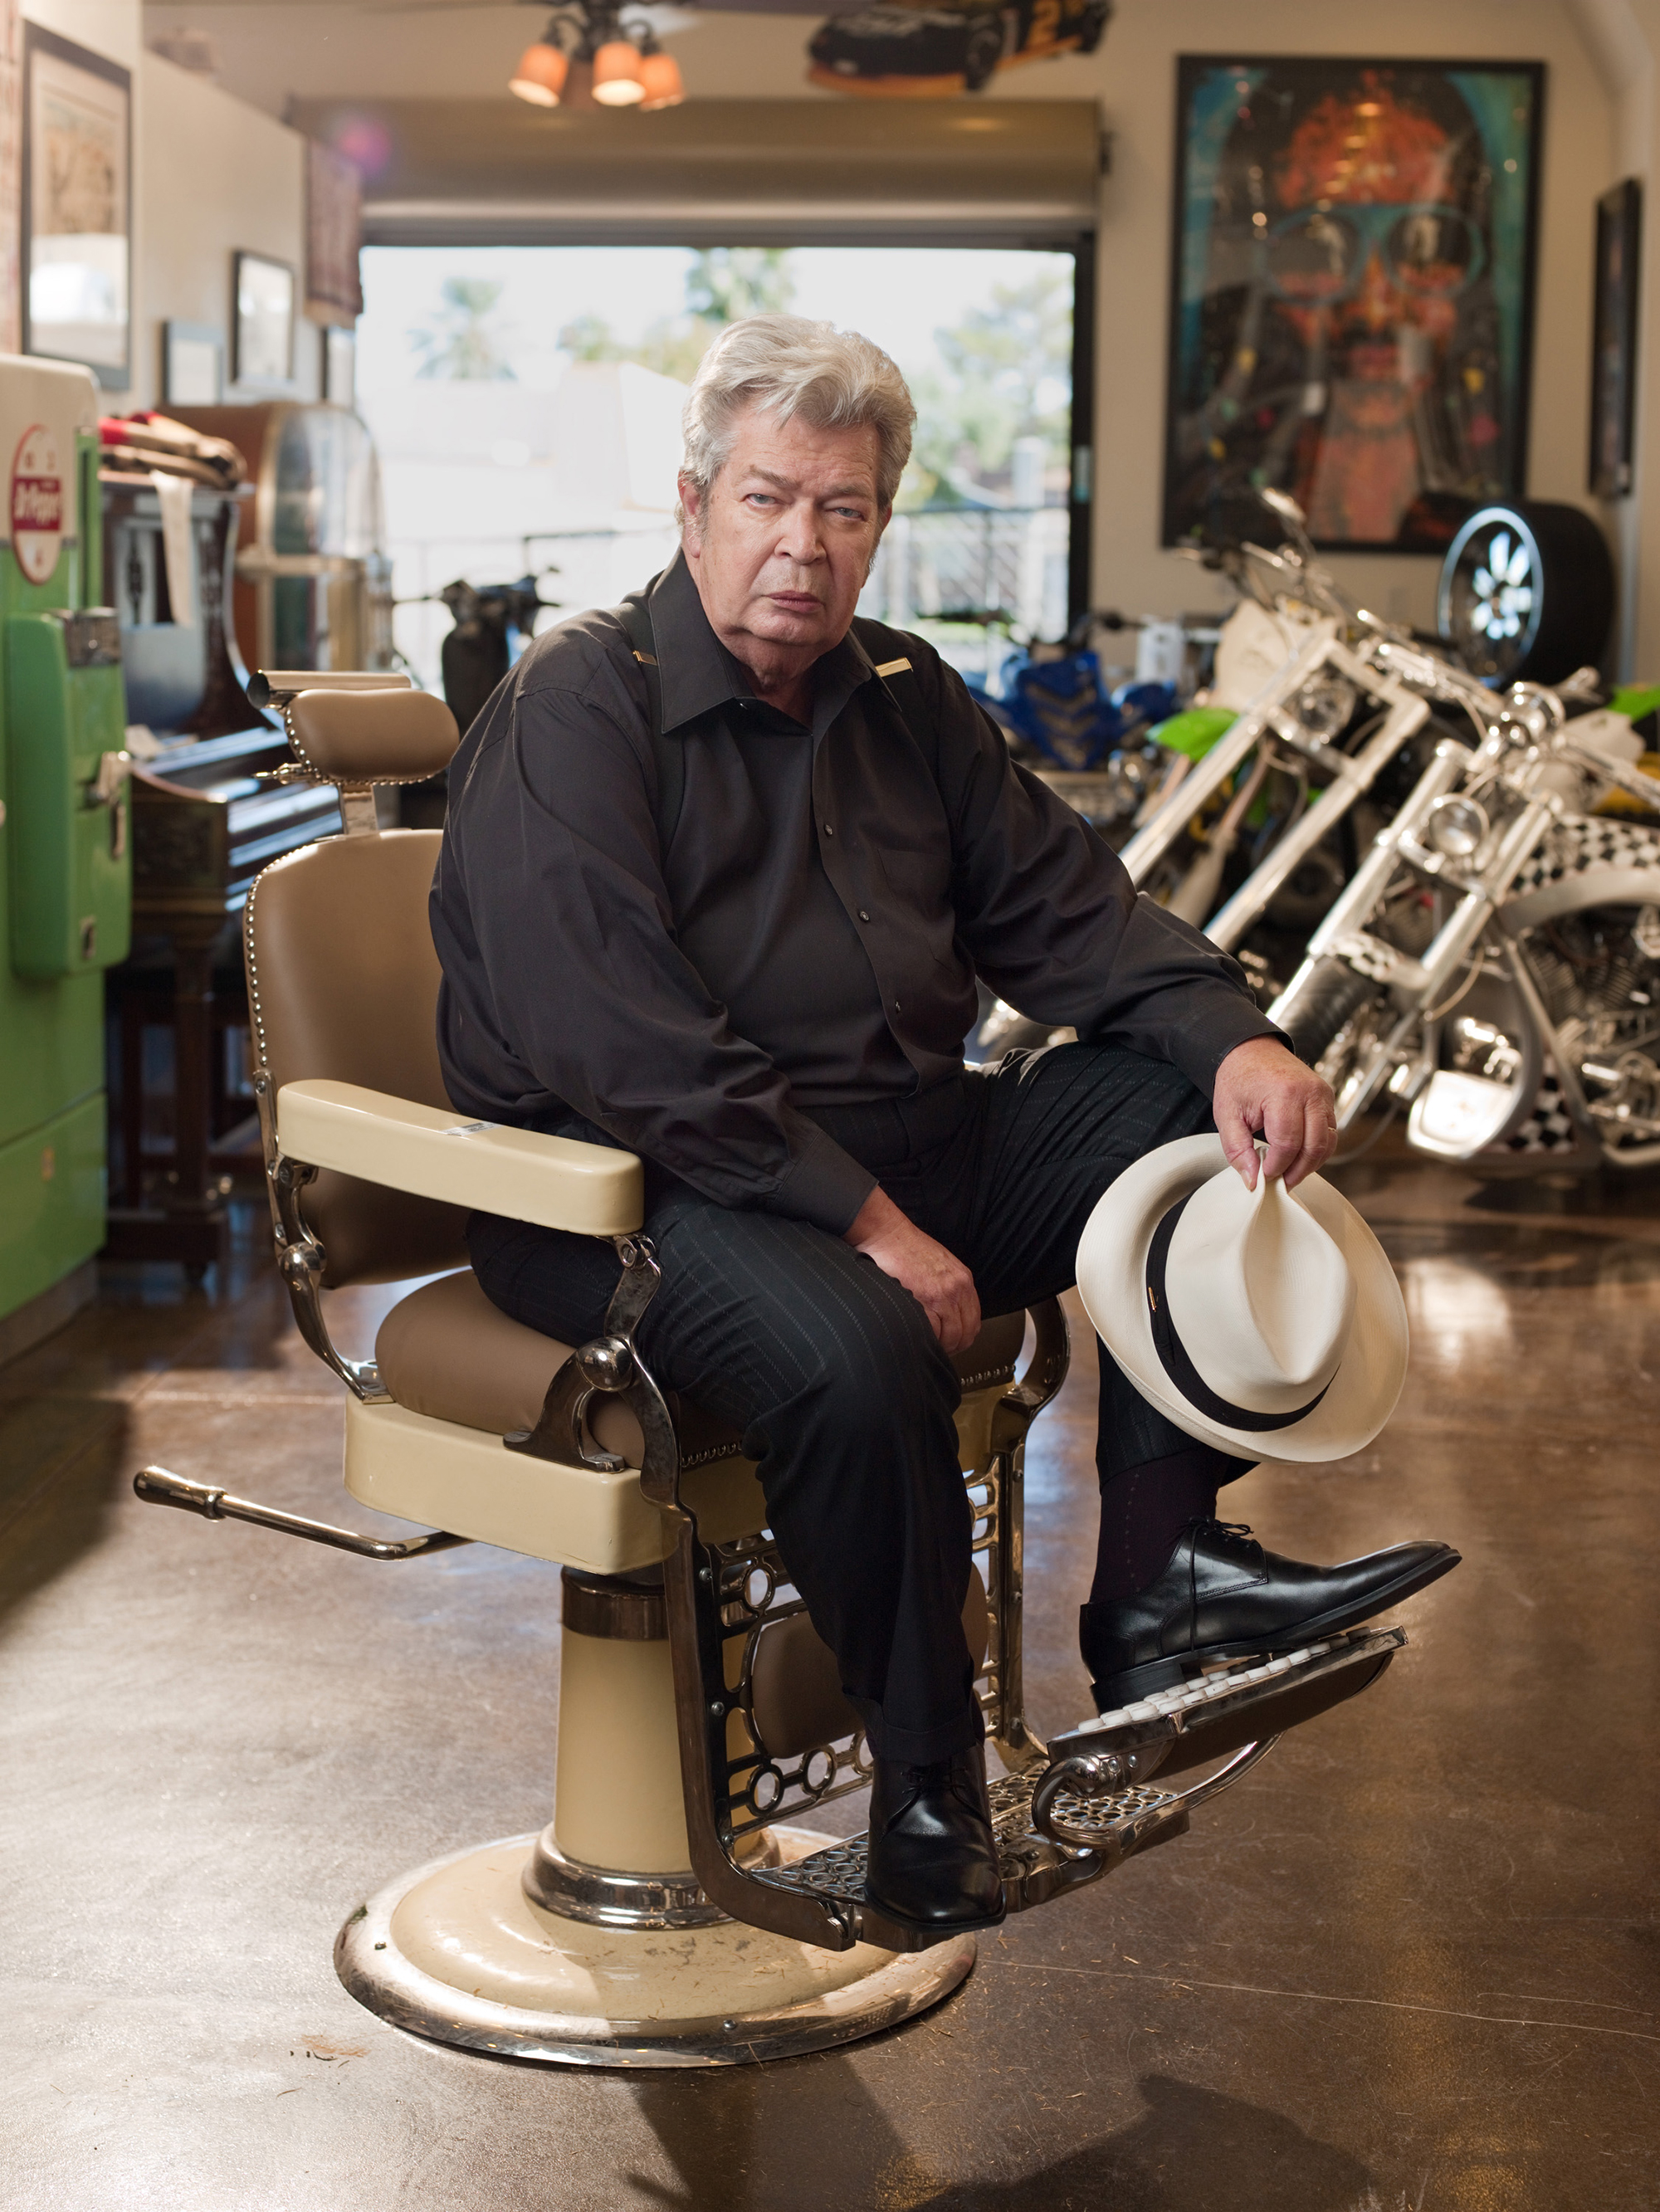 Pawn Stars' Richard Harrison, known as 'The Old Man,' dies